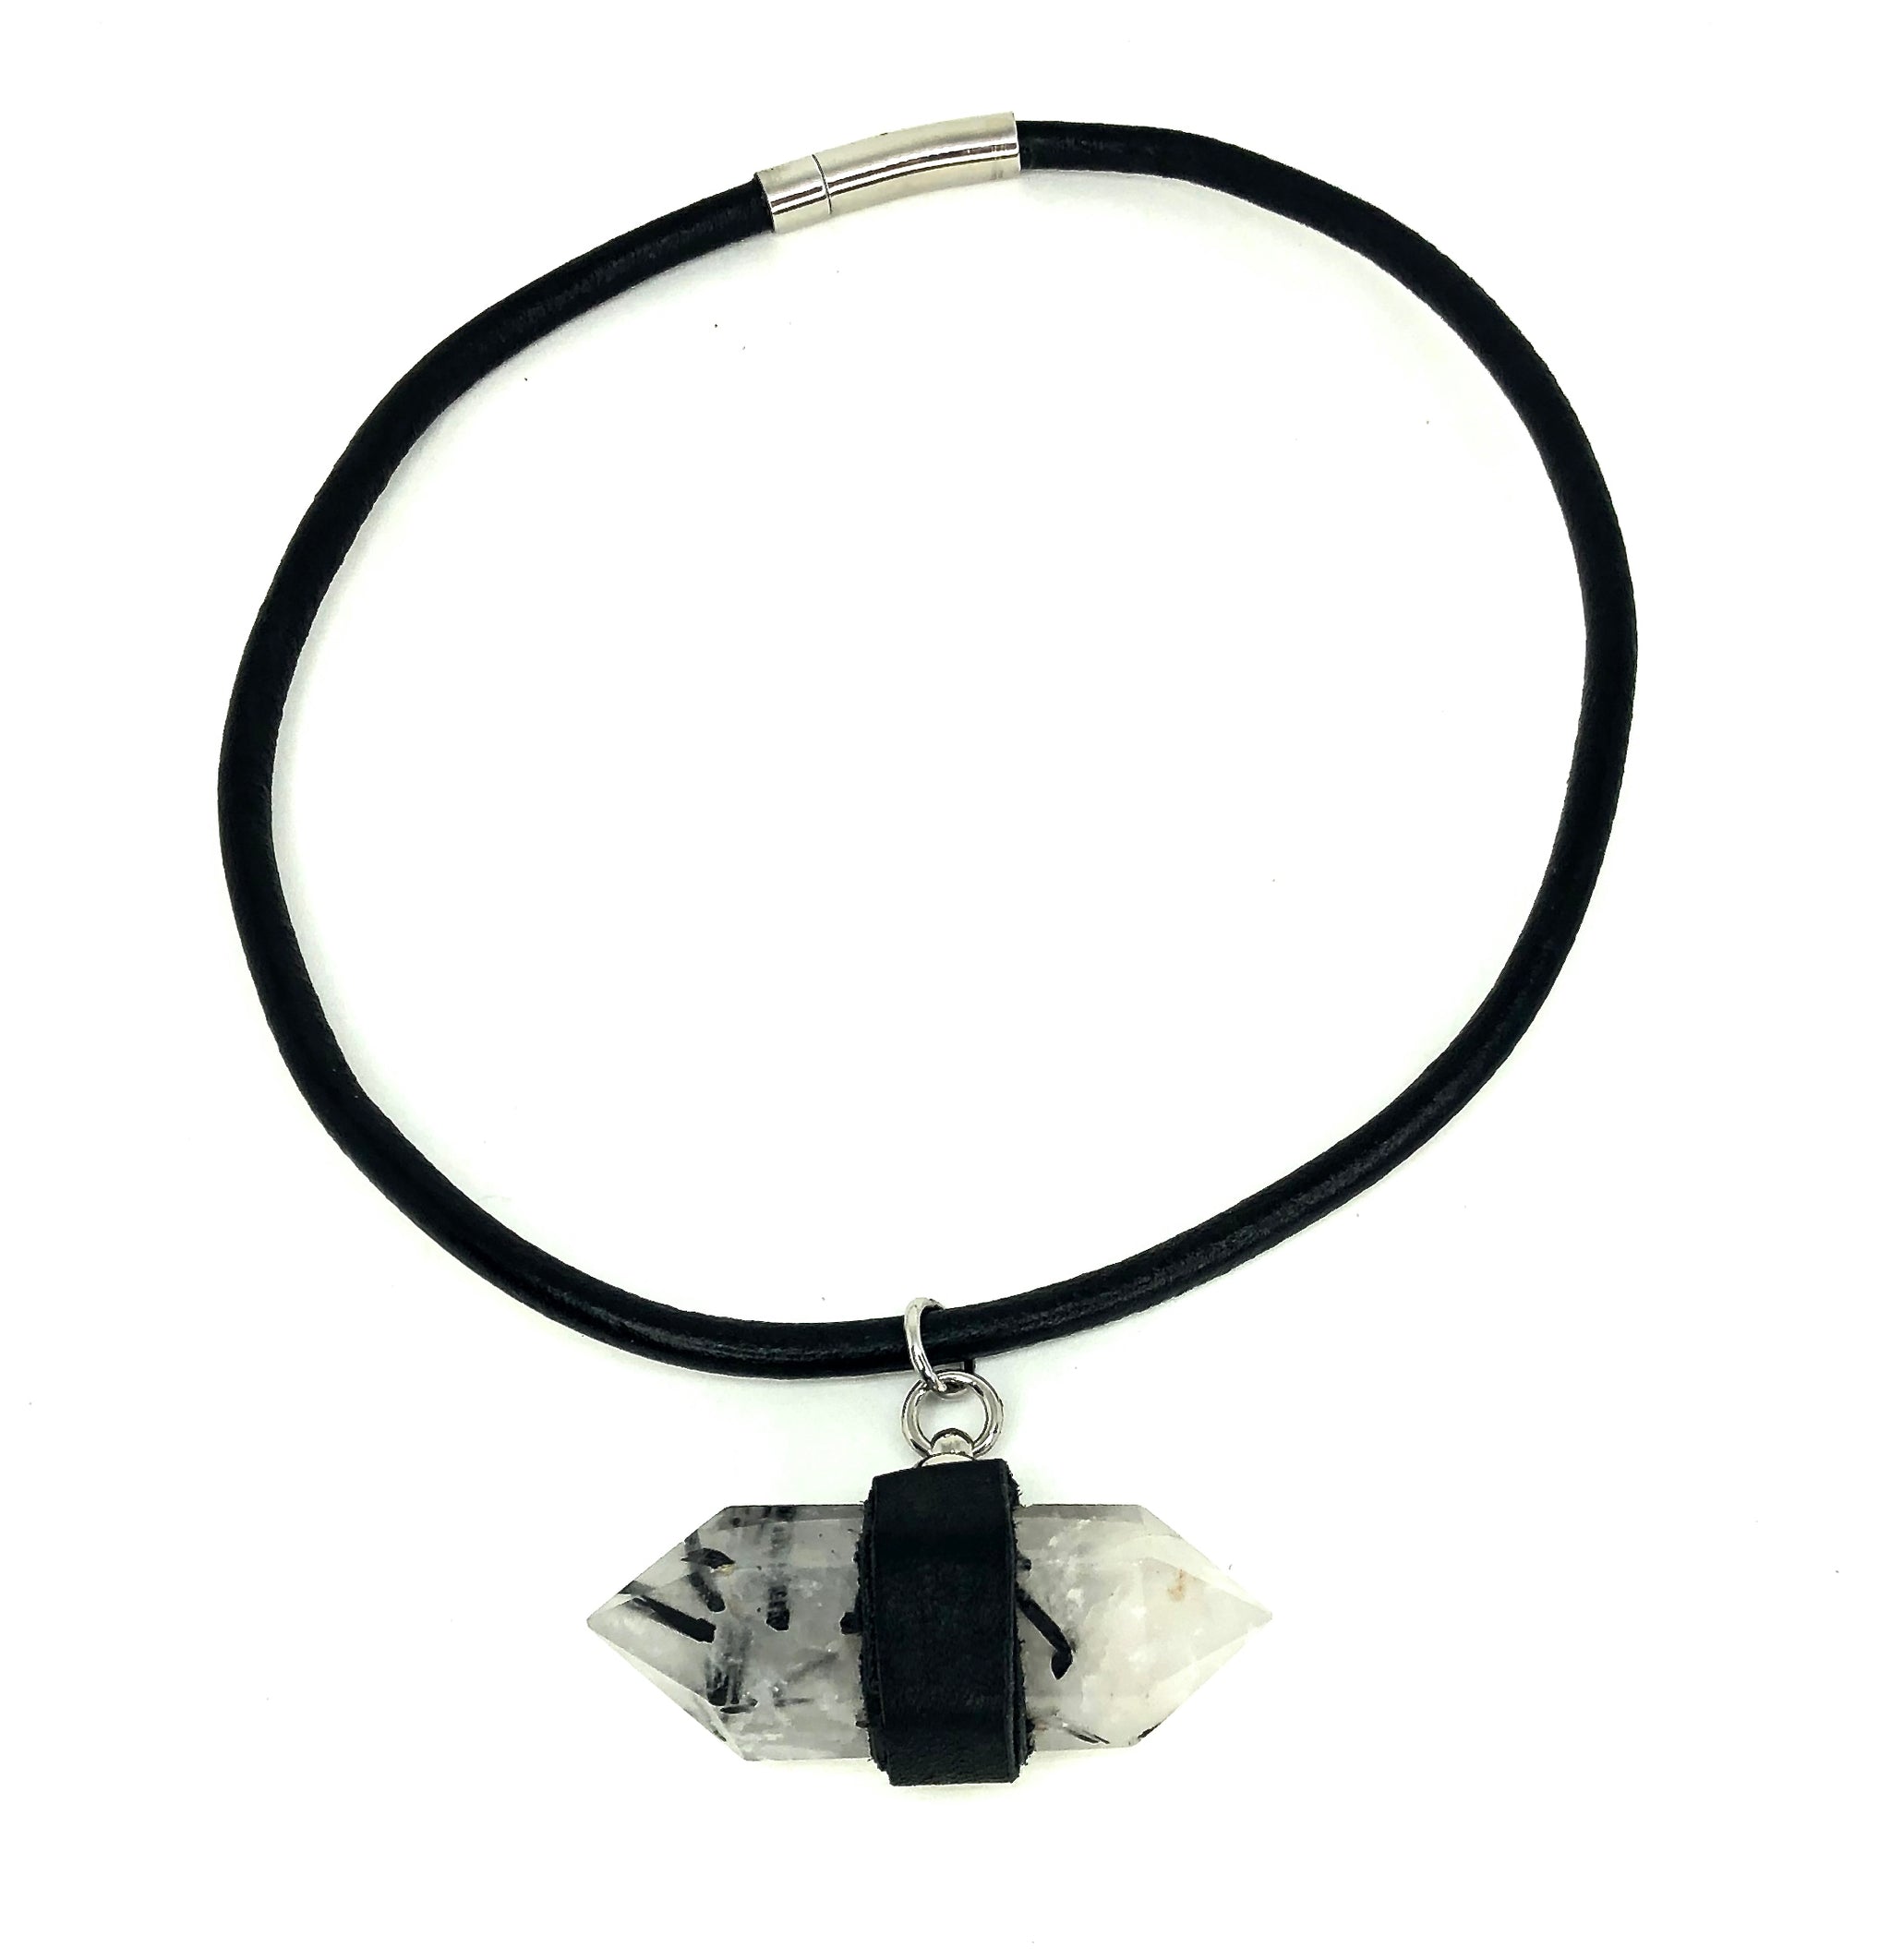 5 MM ROUND LEATHER NECKLACE WITH TOURMALINATED QUARTZ STONE AND DEERSKIN LEATHER PENDANT. by nyet jewelry.